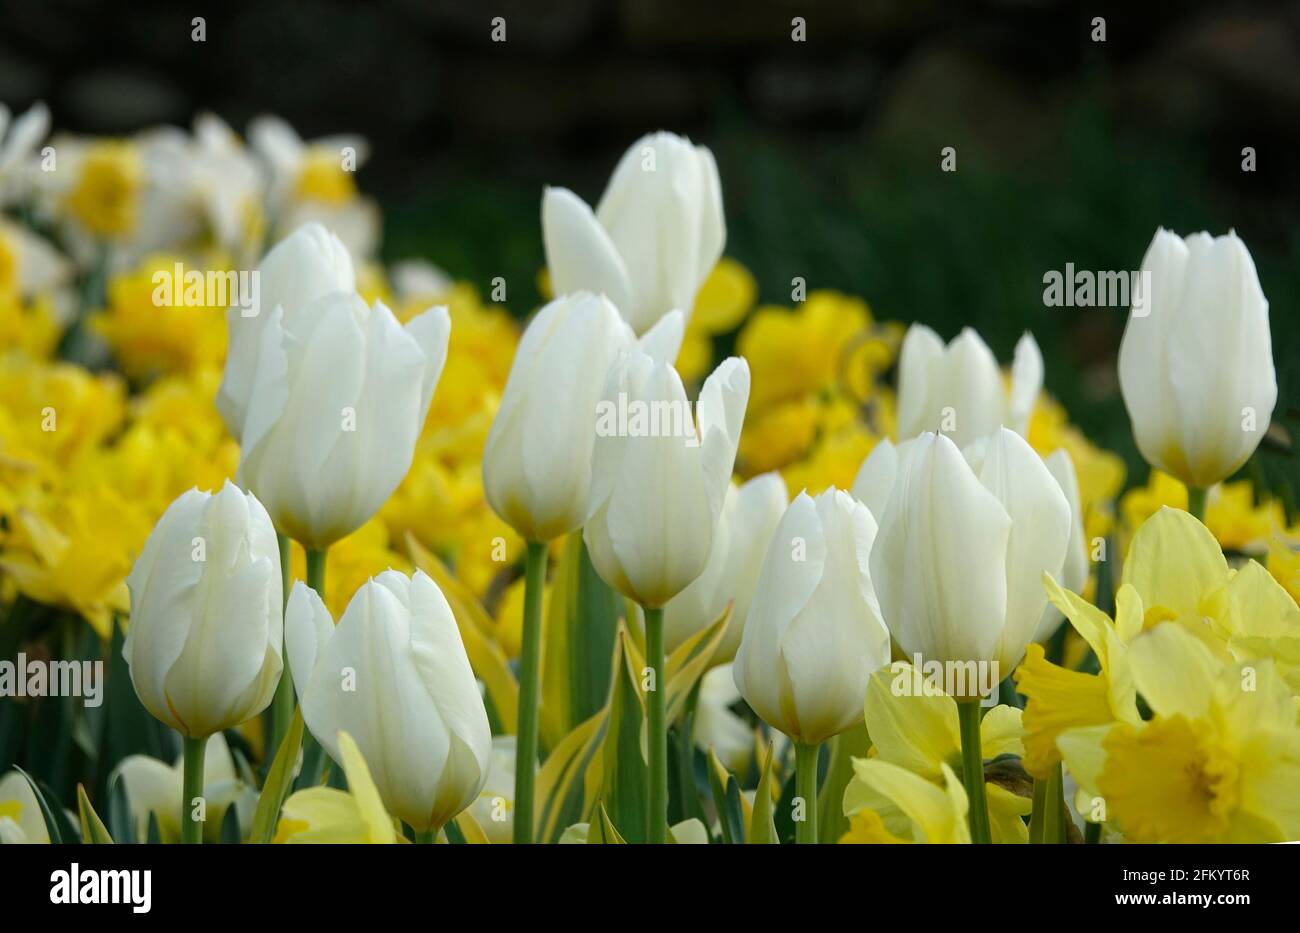 White Triumph Tulips and Yellow Daffodils in a Botanical Garden Stock Photo